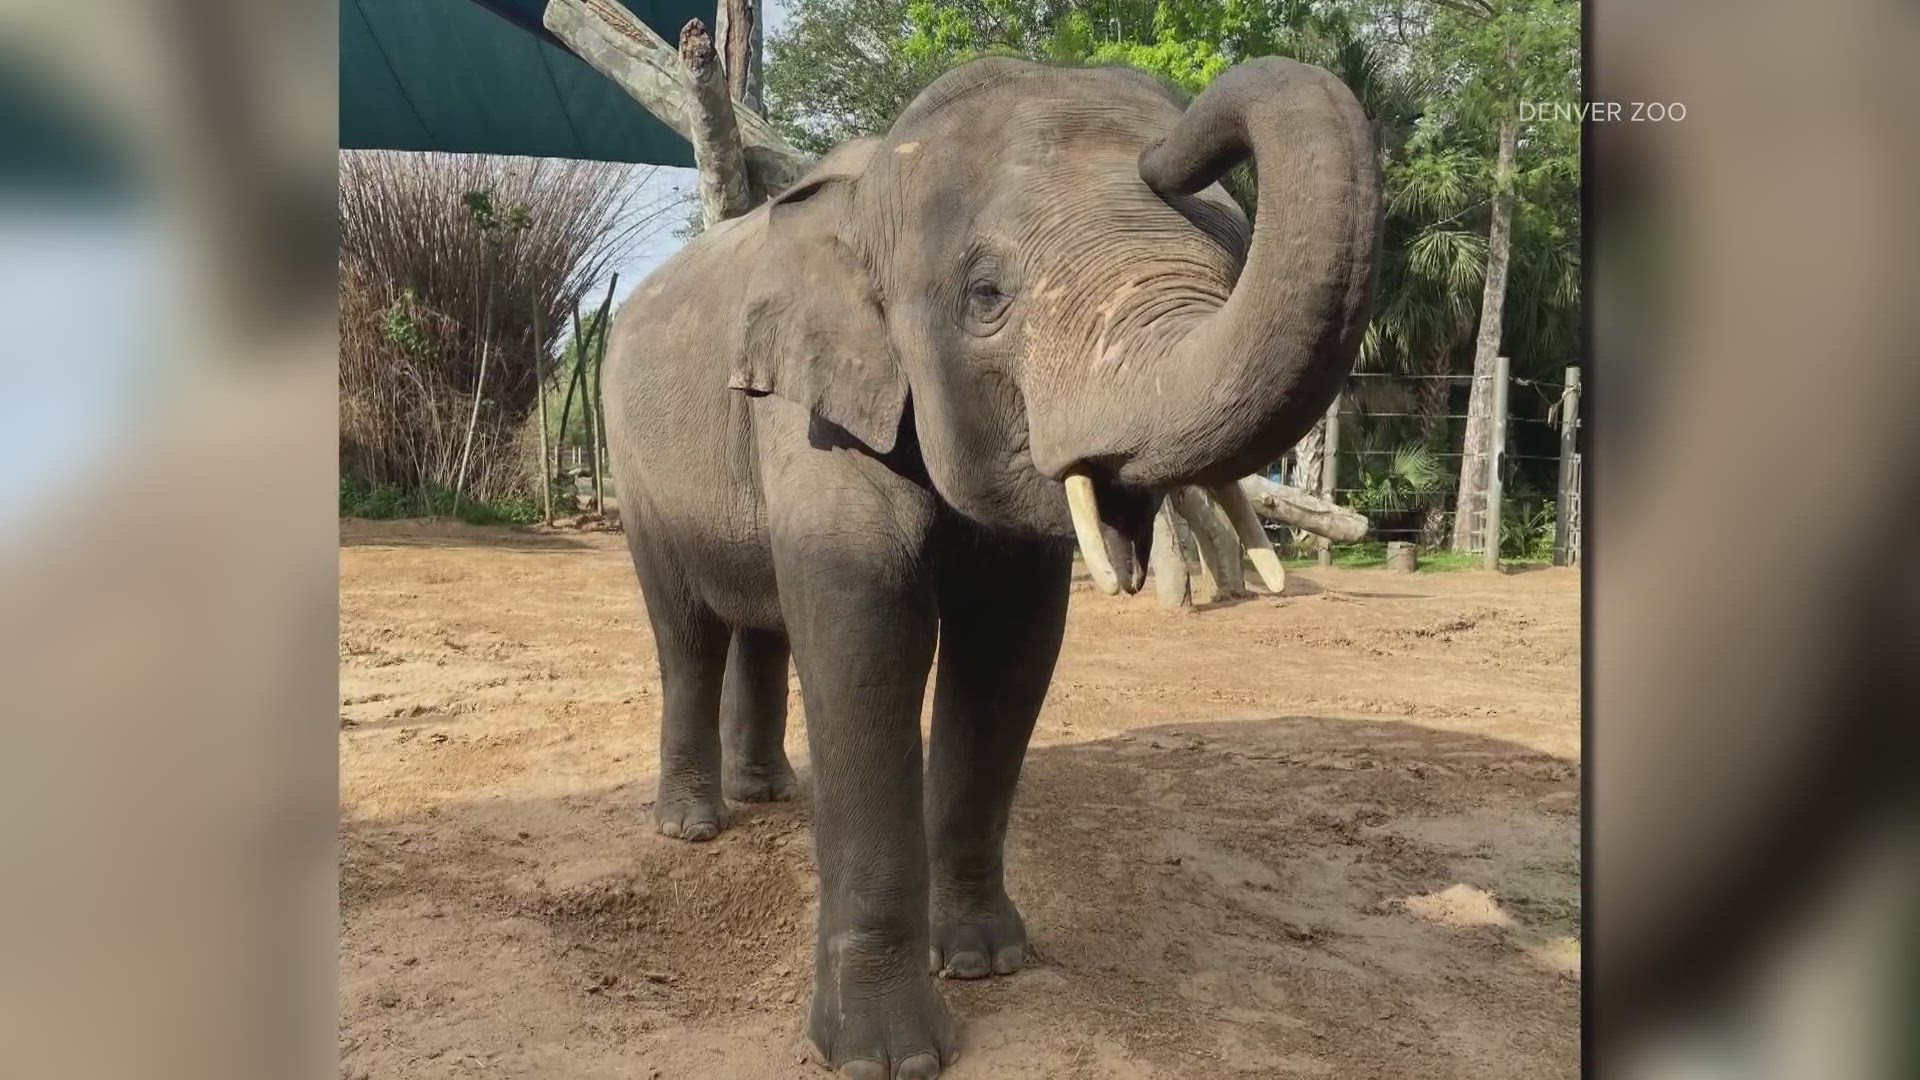 Denver Zoo's newest member has already been introduced to the Asian elephant leader and teacher, Groucho.